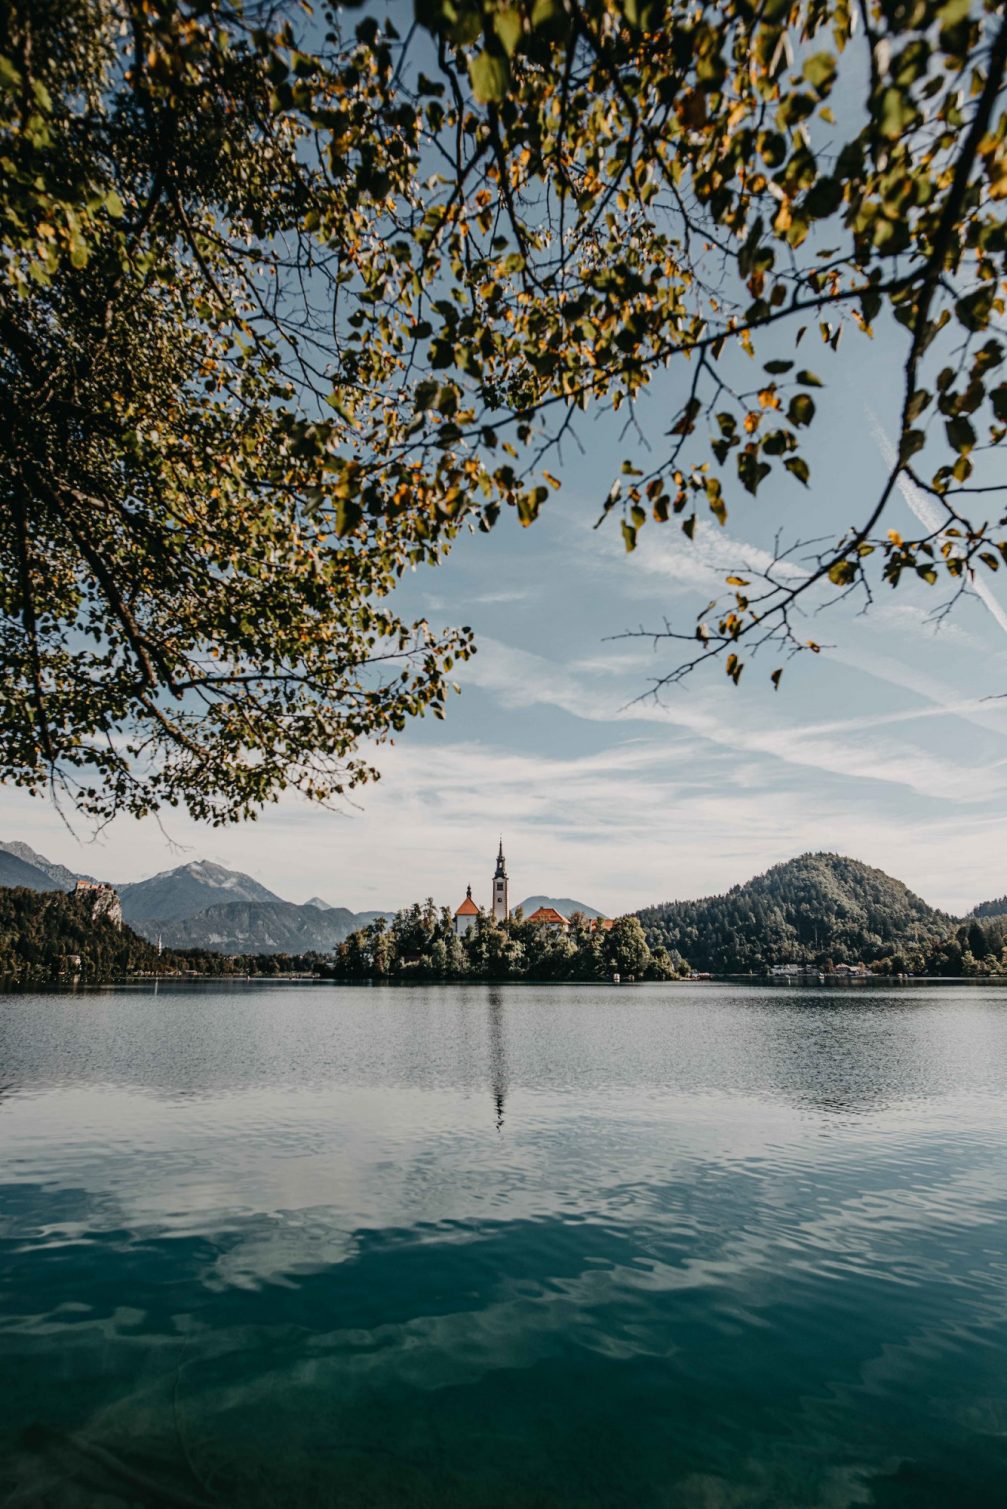 View of Bled Island in the middle of Lake Bled through the green tree branches